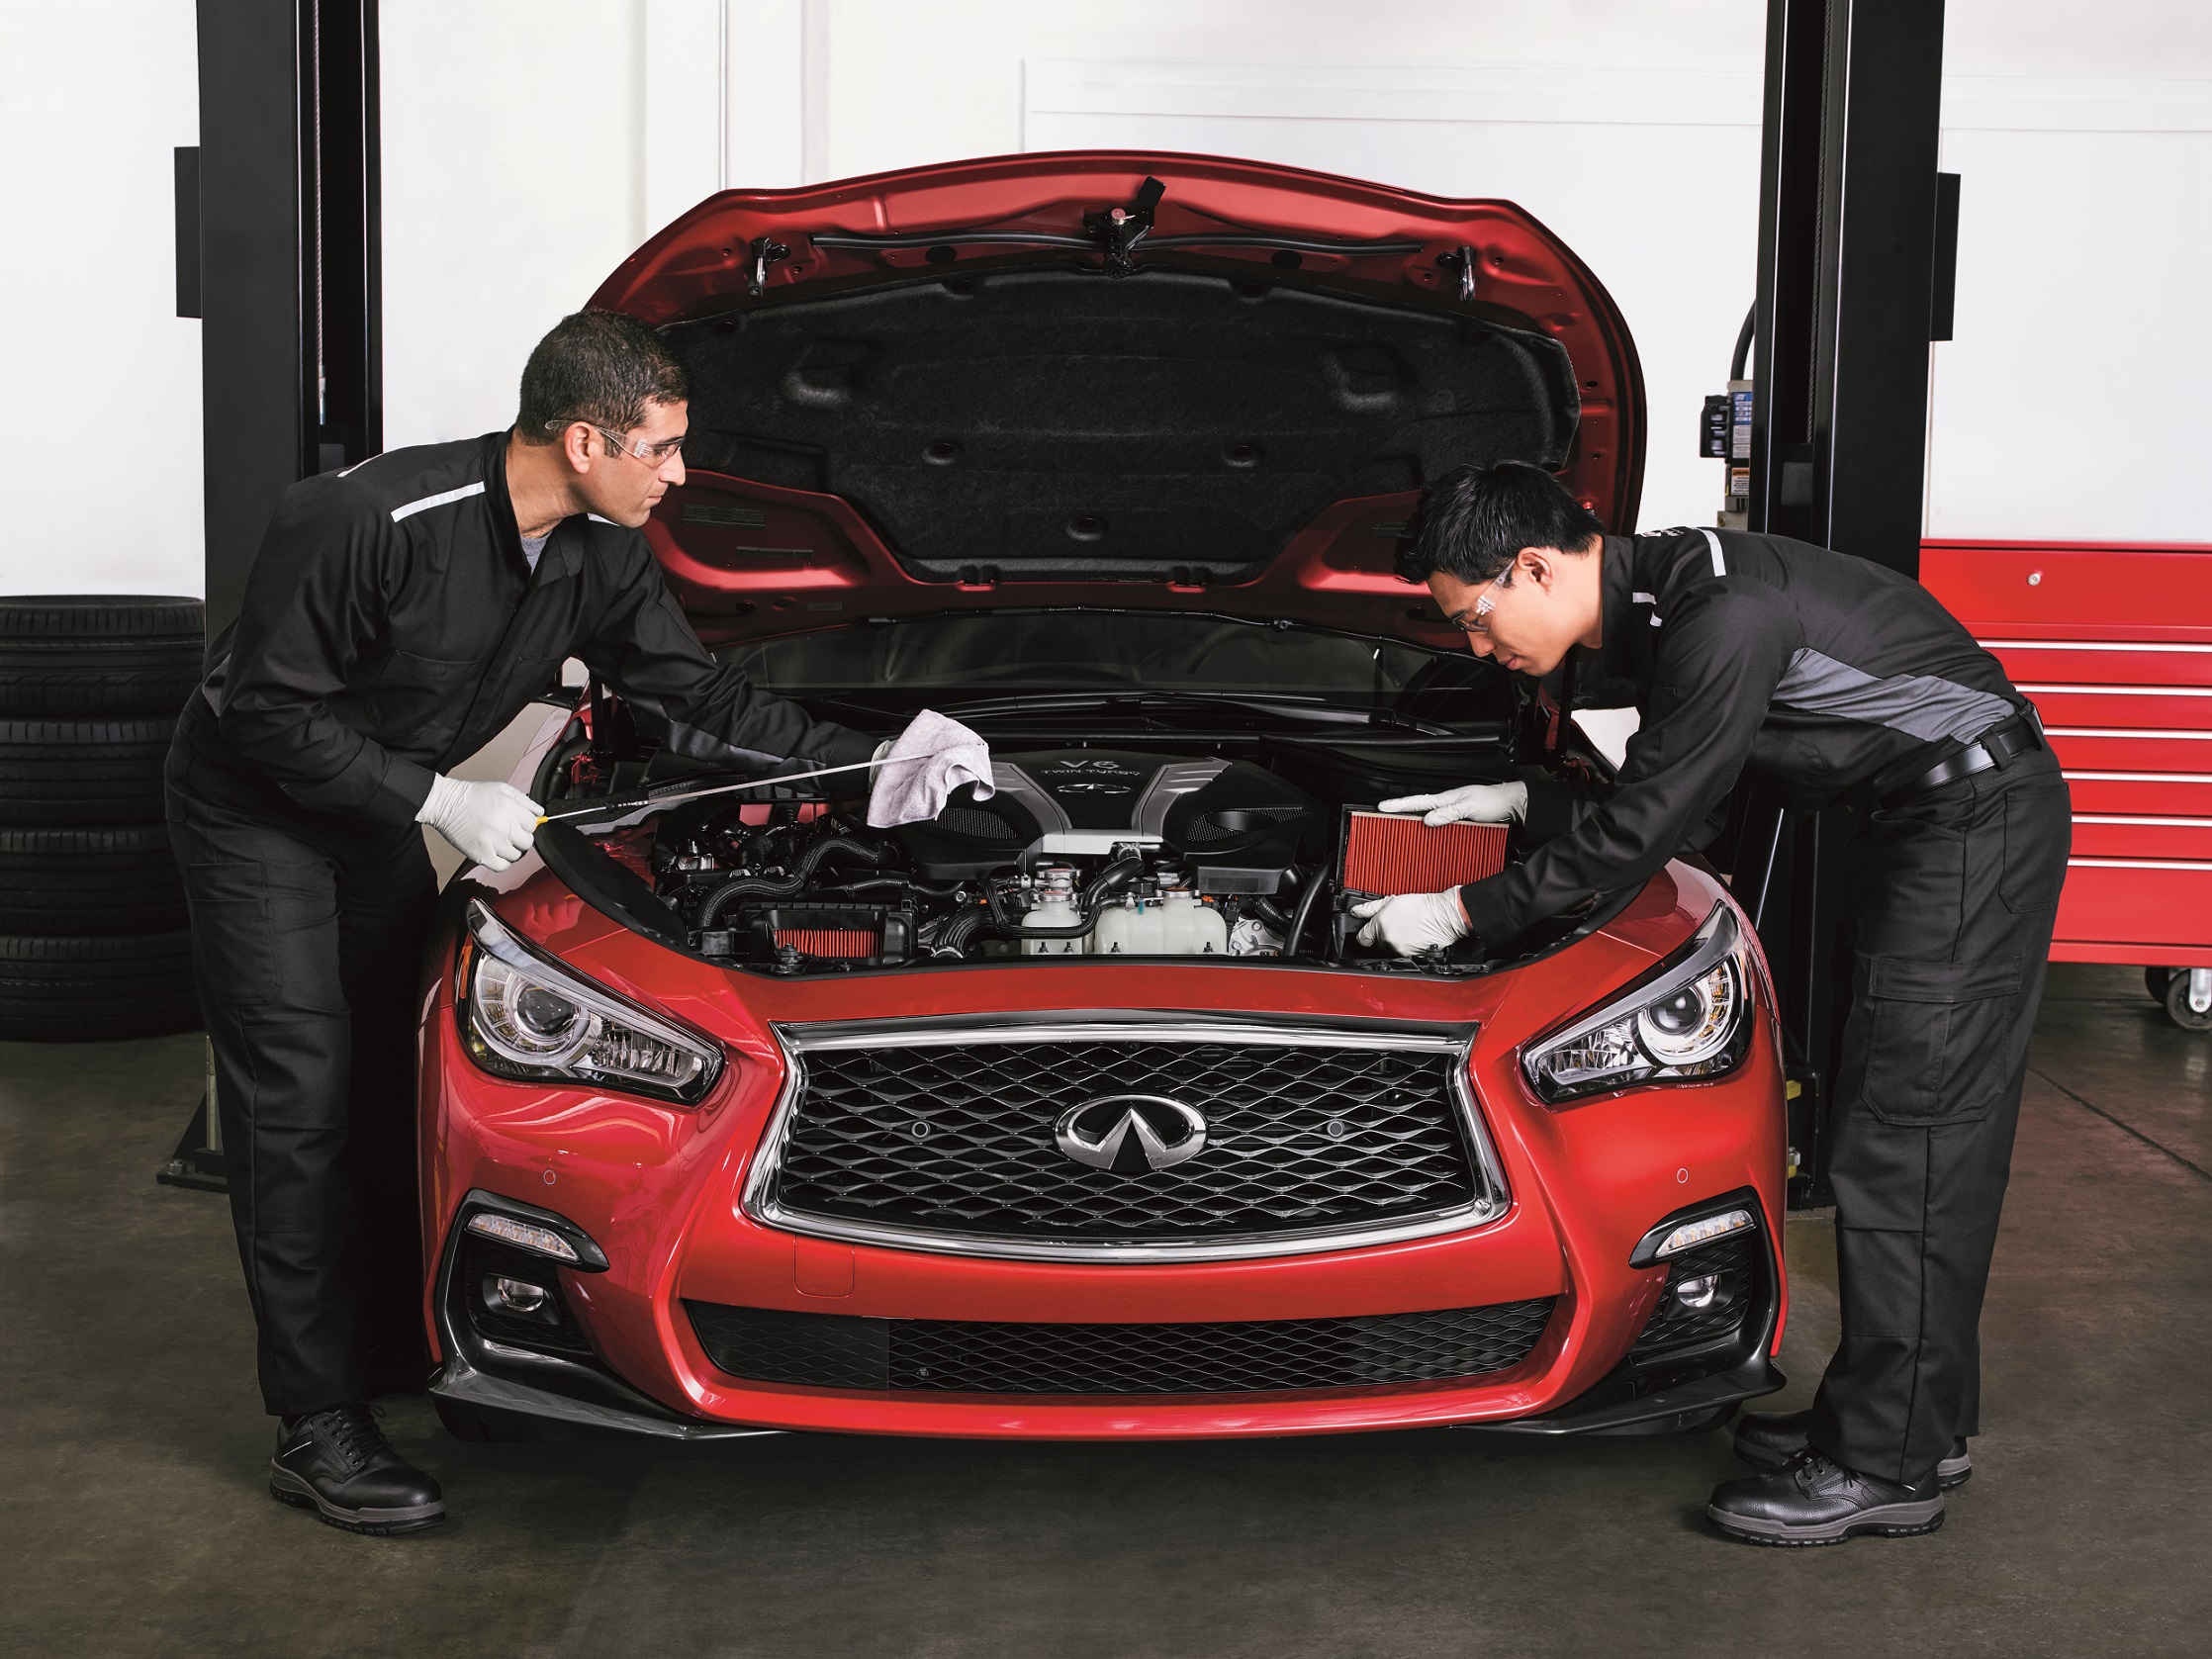 KEEP COOL ON THE ROADS: INFINITI MIDDLE EAST SHOWS CAR OWNERS HOW TO LOOK AFTER THEIR CARS THIS SUMMER